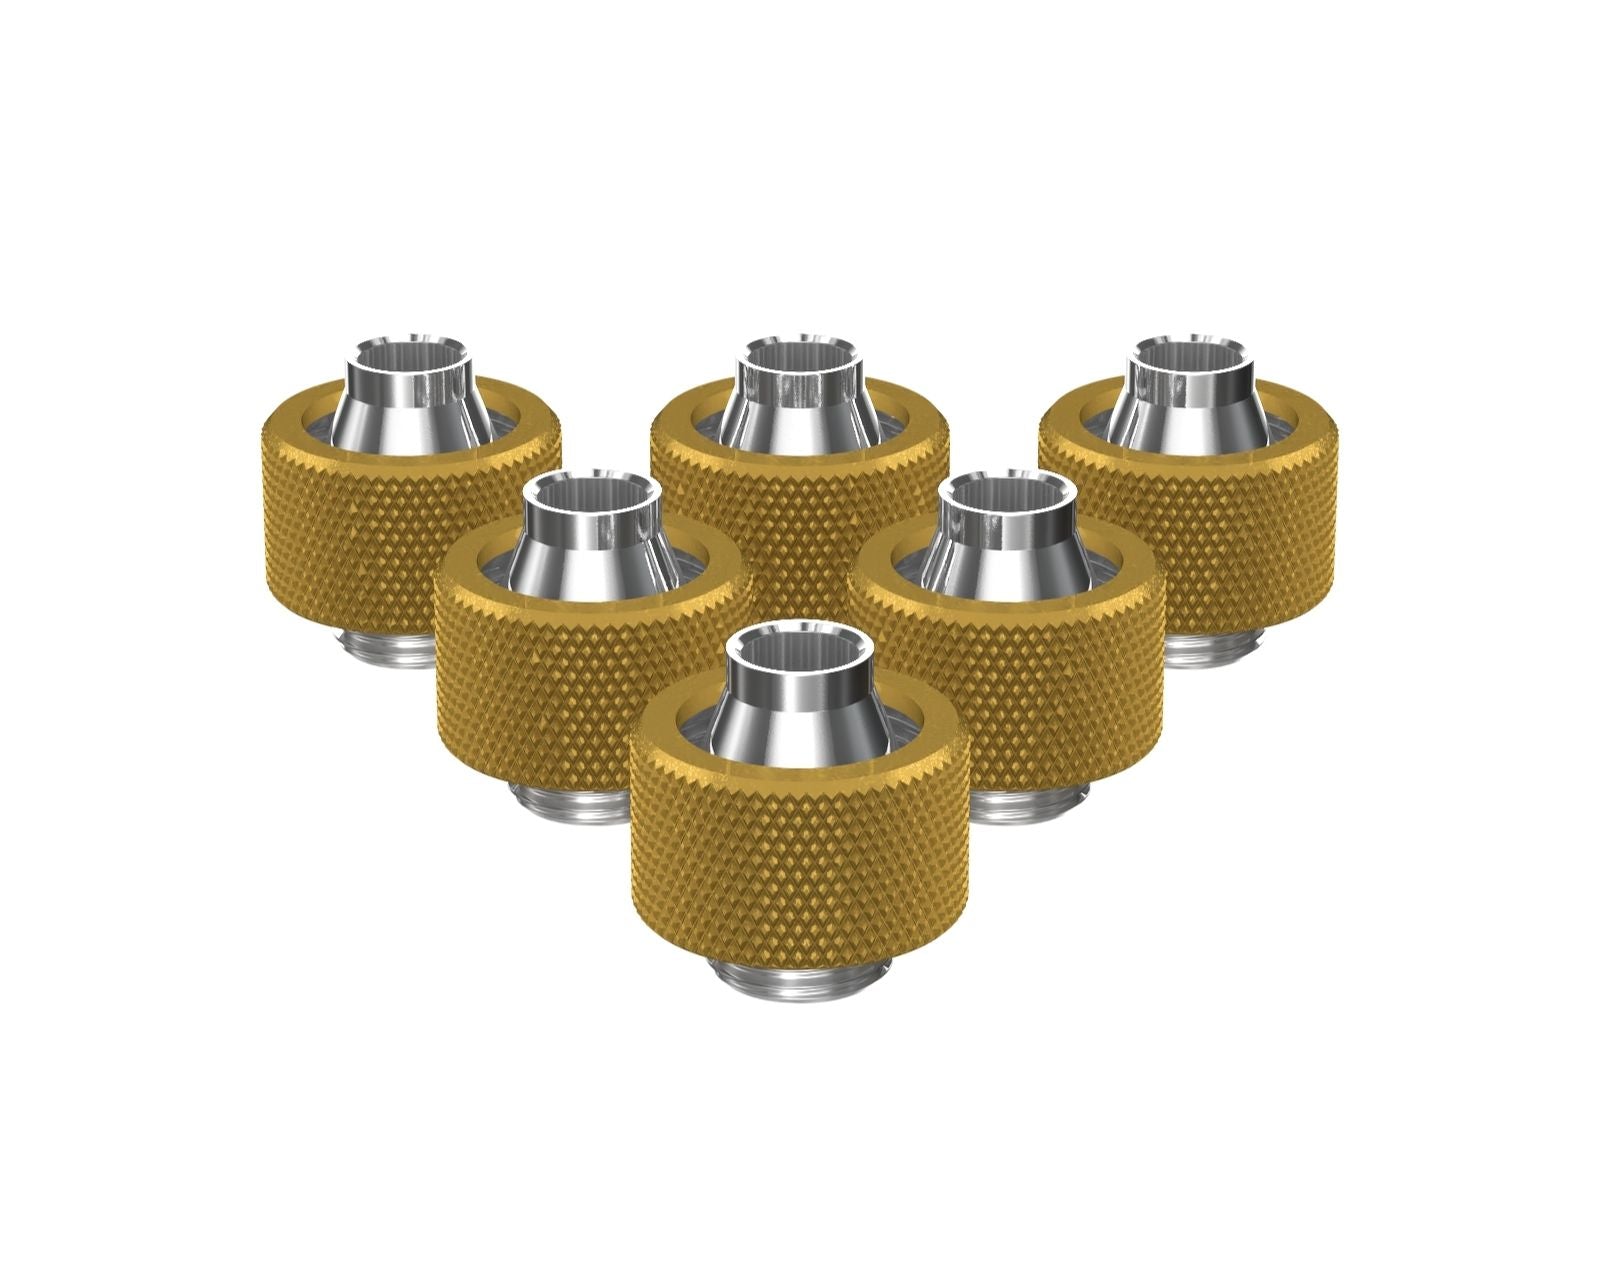 PrimoChill SecureFit SX - Premium Compression Fitting For 3/8in ID x 5/8in OD Flexible Tubing 6 Pack (F-SFSX58-6) - Available in 20+ Colors, Custom Watercooling Loop Ready - Gold